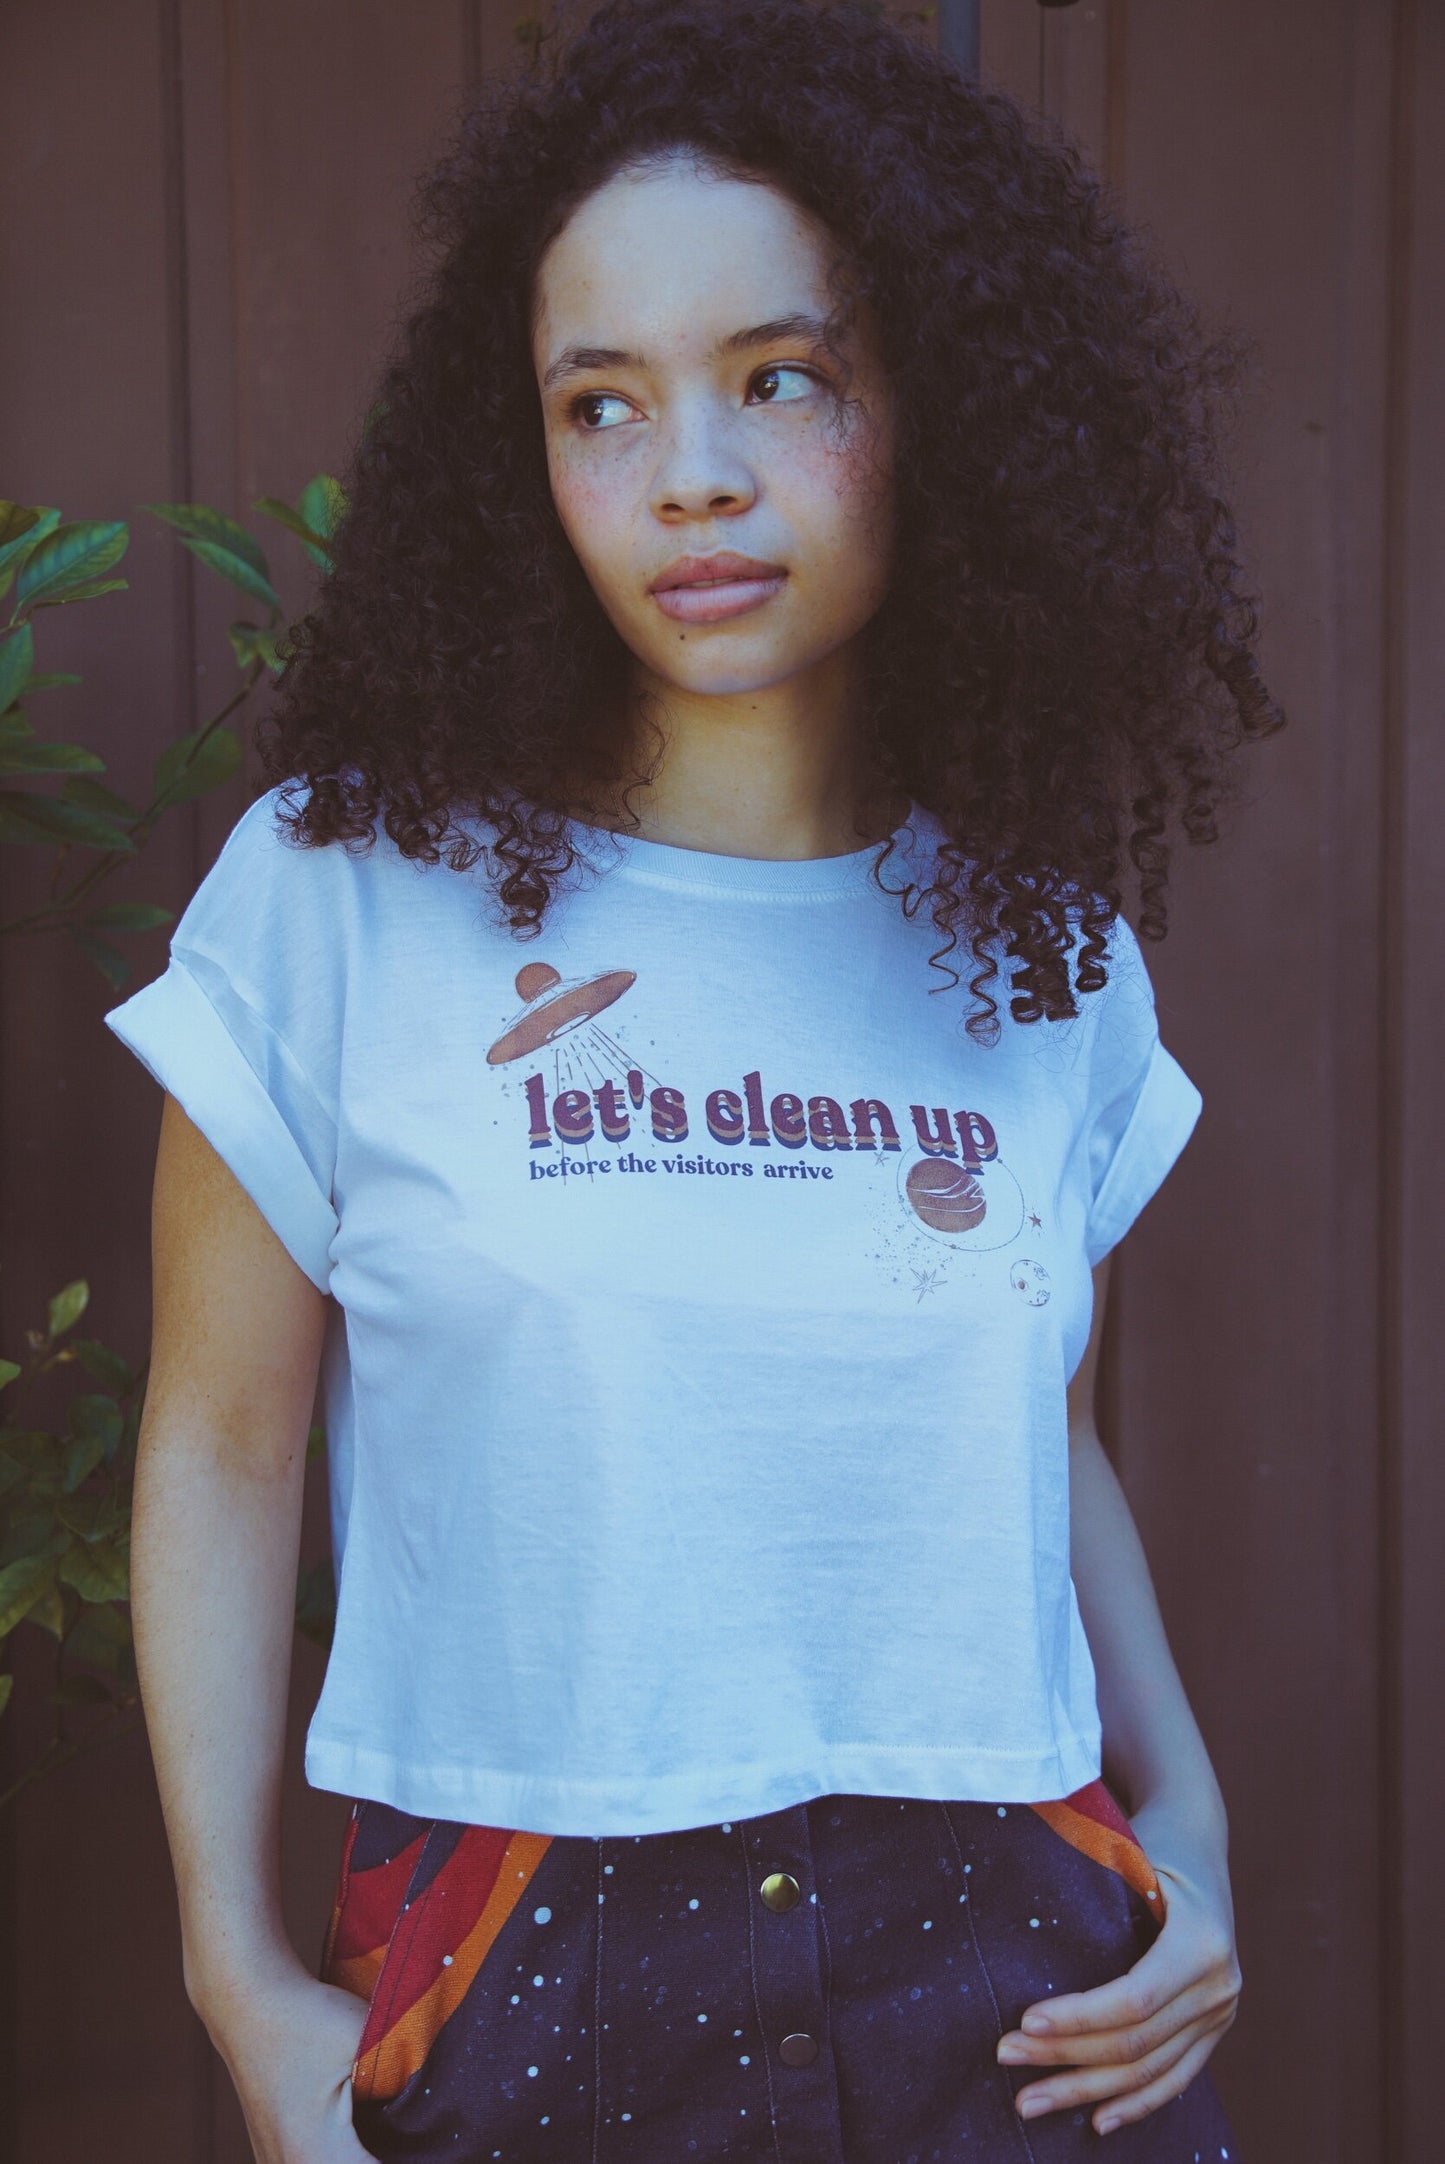 Lets clean up, Tees Organic cotton clothes for women, Organic Cotton Clothing for Women, Organic Cotton Tank Tops, Cotton Organic T Shirts, Organic Cotton T Shirt, Band Tees, Vintage Tees, Rolling Stones Bomber Jacket, Stoned Girls, She's a rainbow, Environmental Slogan Tshirt, Sustainable Fashion Ideas, Sustainable Fashion Dresses, What is sustainability in fashion, Teen sustainable fashion and ethical brands, Sustainable Fashion Course, made to order clothing, made to order shirts,